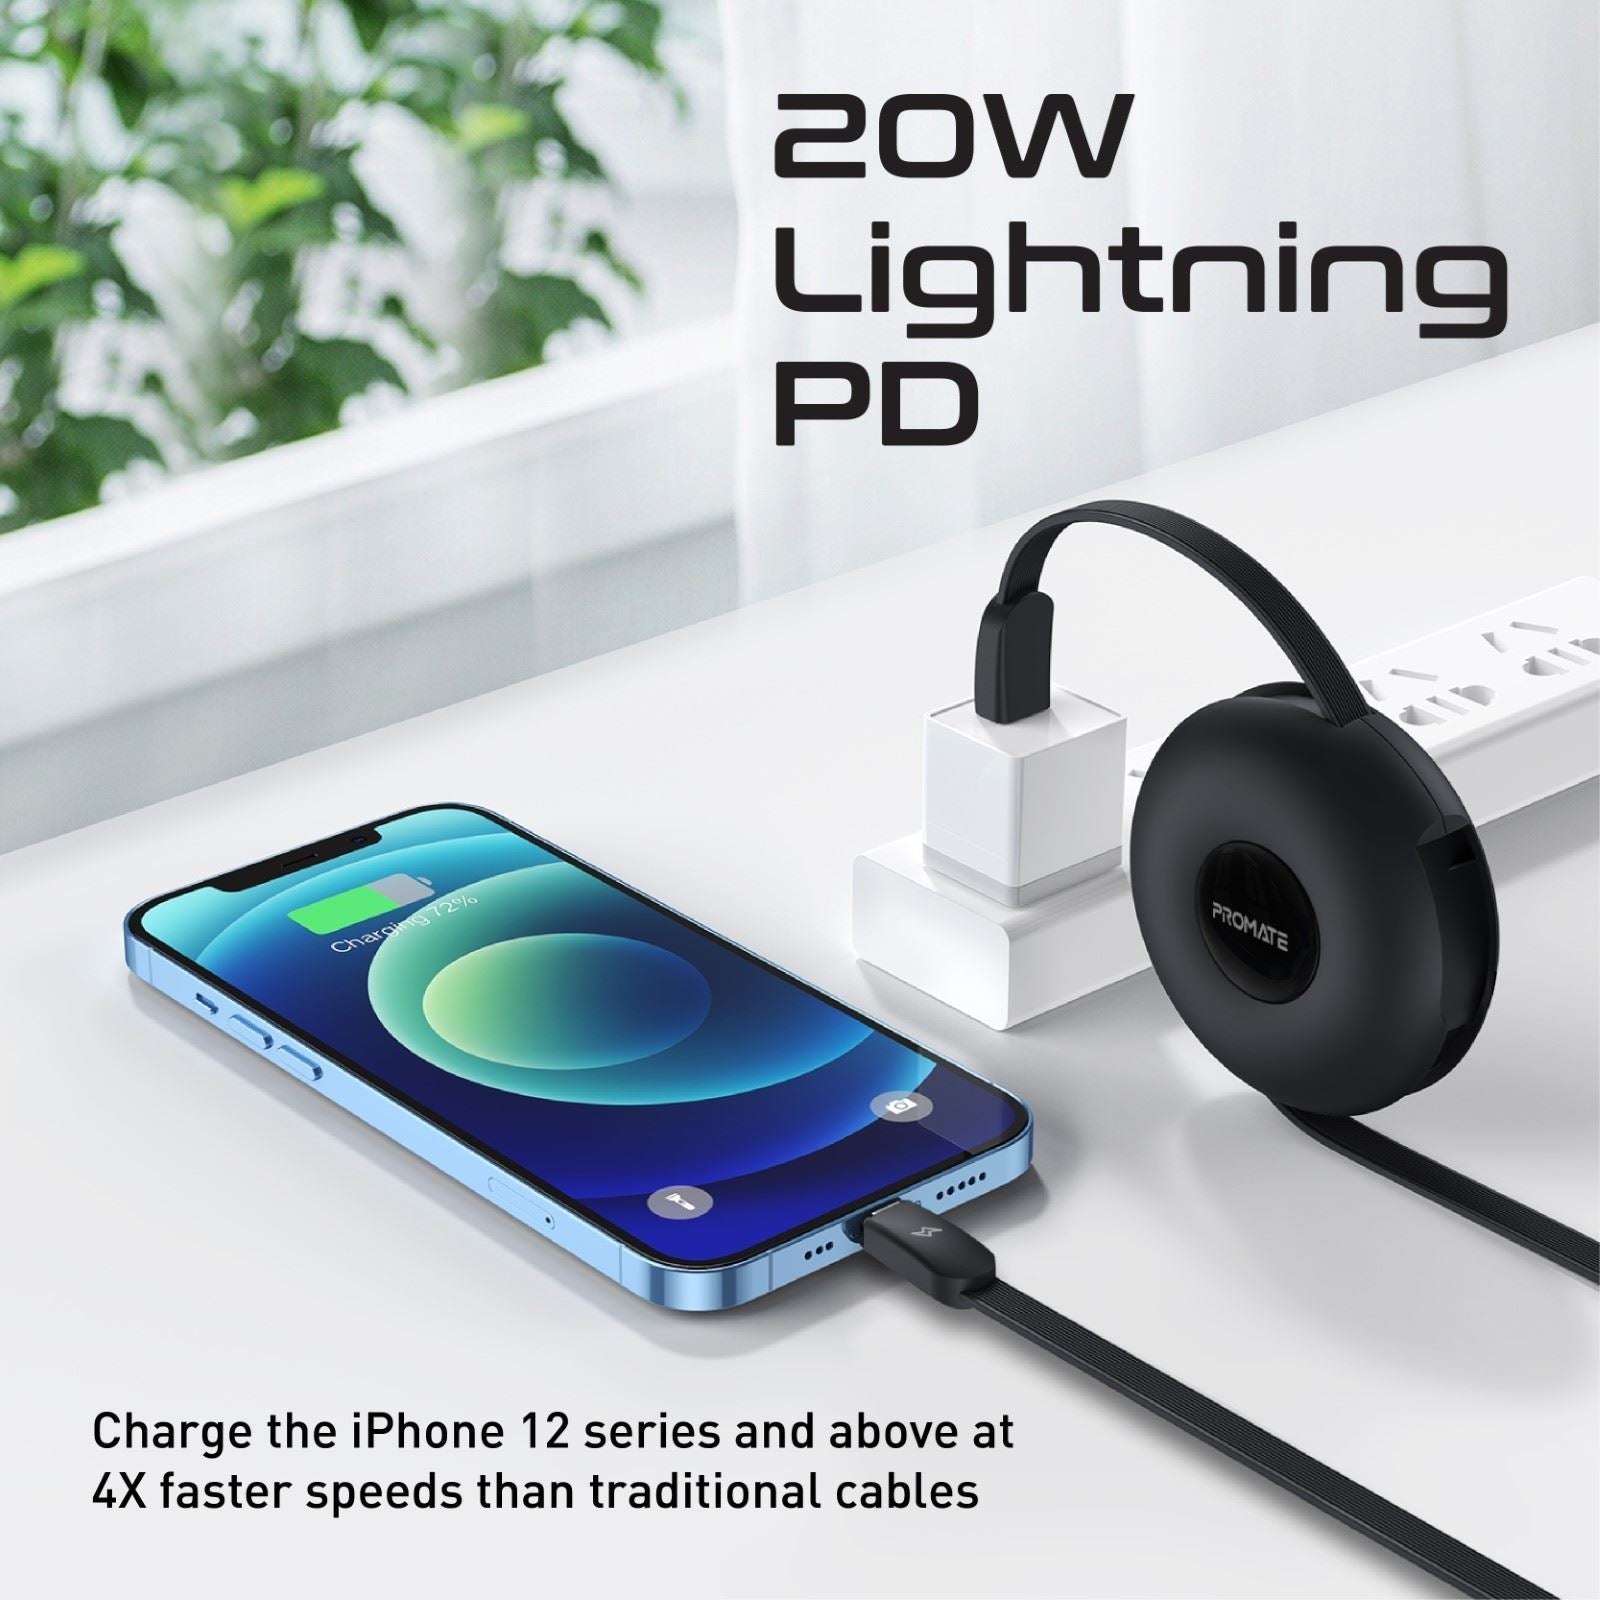 PROMATE_3in1_USB-C_Retractable_Data_&_Charge_Cable_with_Changeable_Magnetic_Connectors._Includes_USB-C_Micro-USB_&_Lightning_Connectors._Supports_60W_USB-C_&_20W_Lightning_PD,_Auto_Recoil._Black_Colour 1741